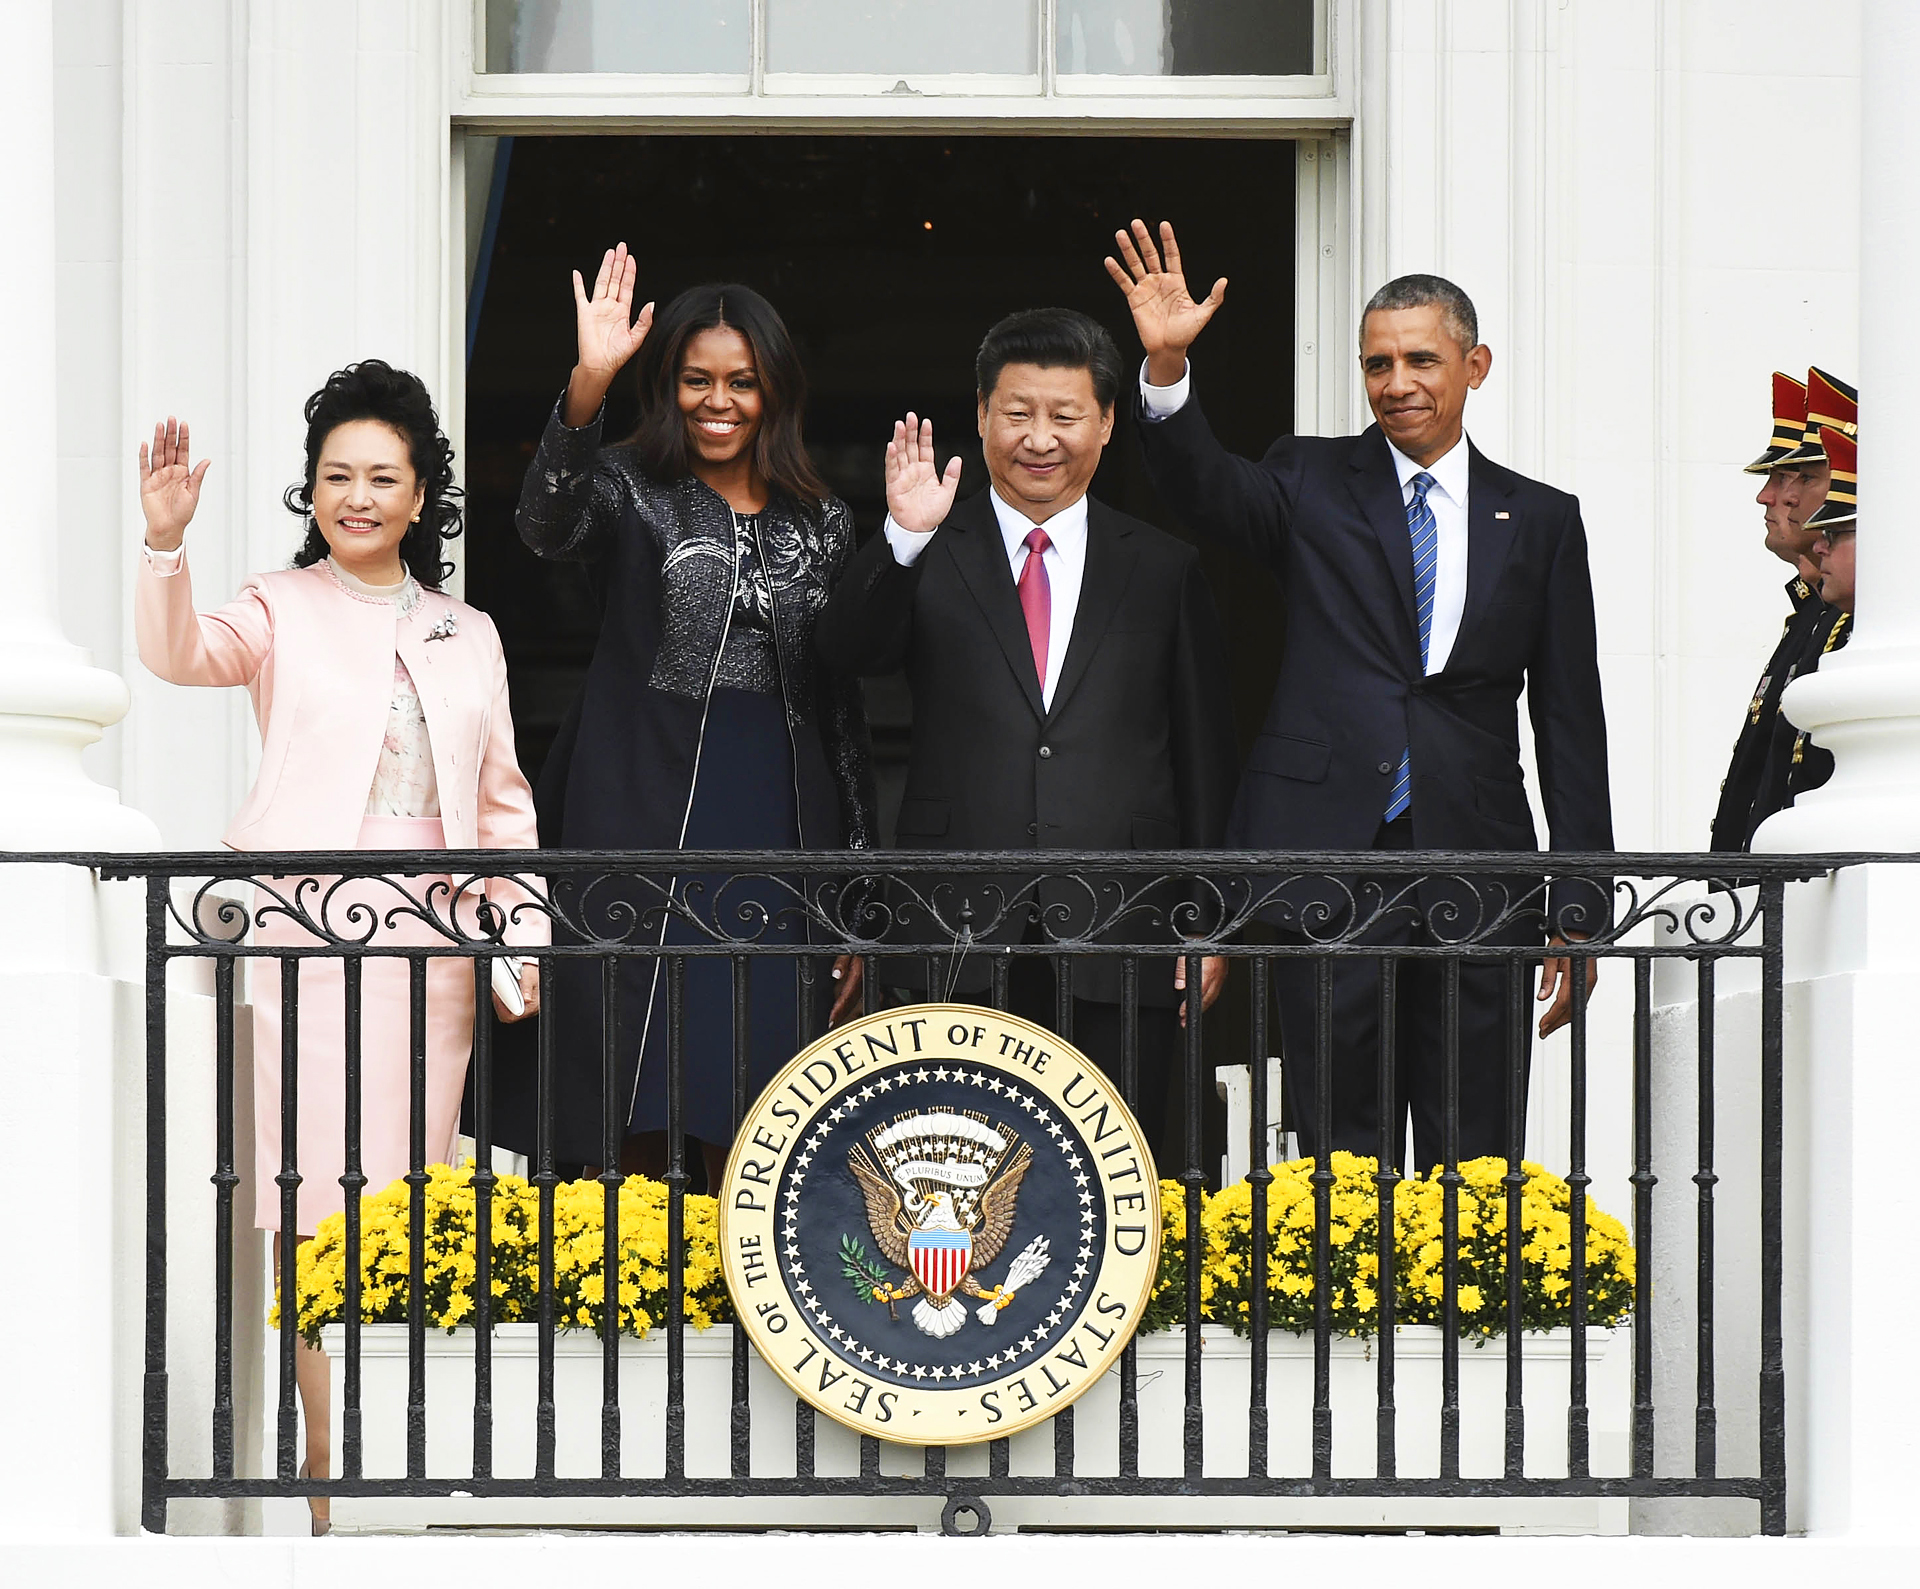 President Xi Jinping and his first lady Peng Liyuan join US President Barack Obama and his wife Michelle in greeting people at the White House yesterday as the state visit continued. Photo: AFP